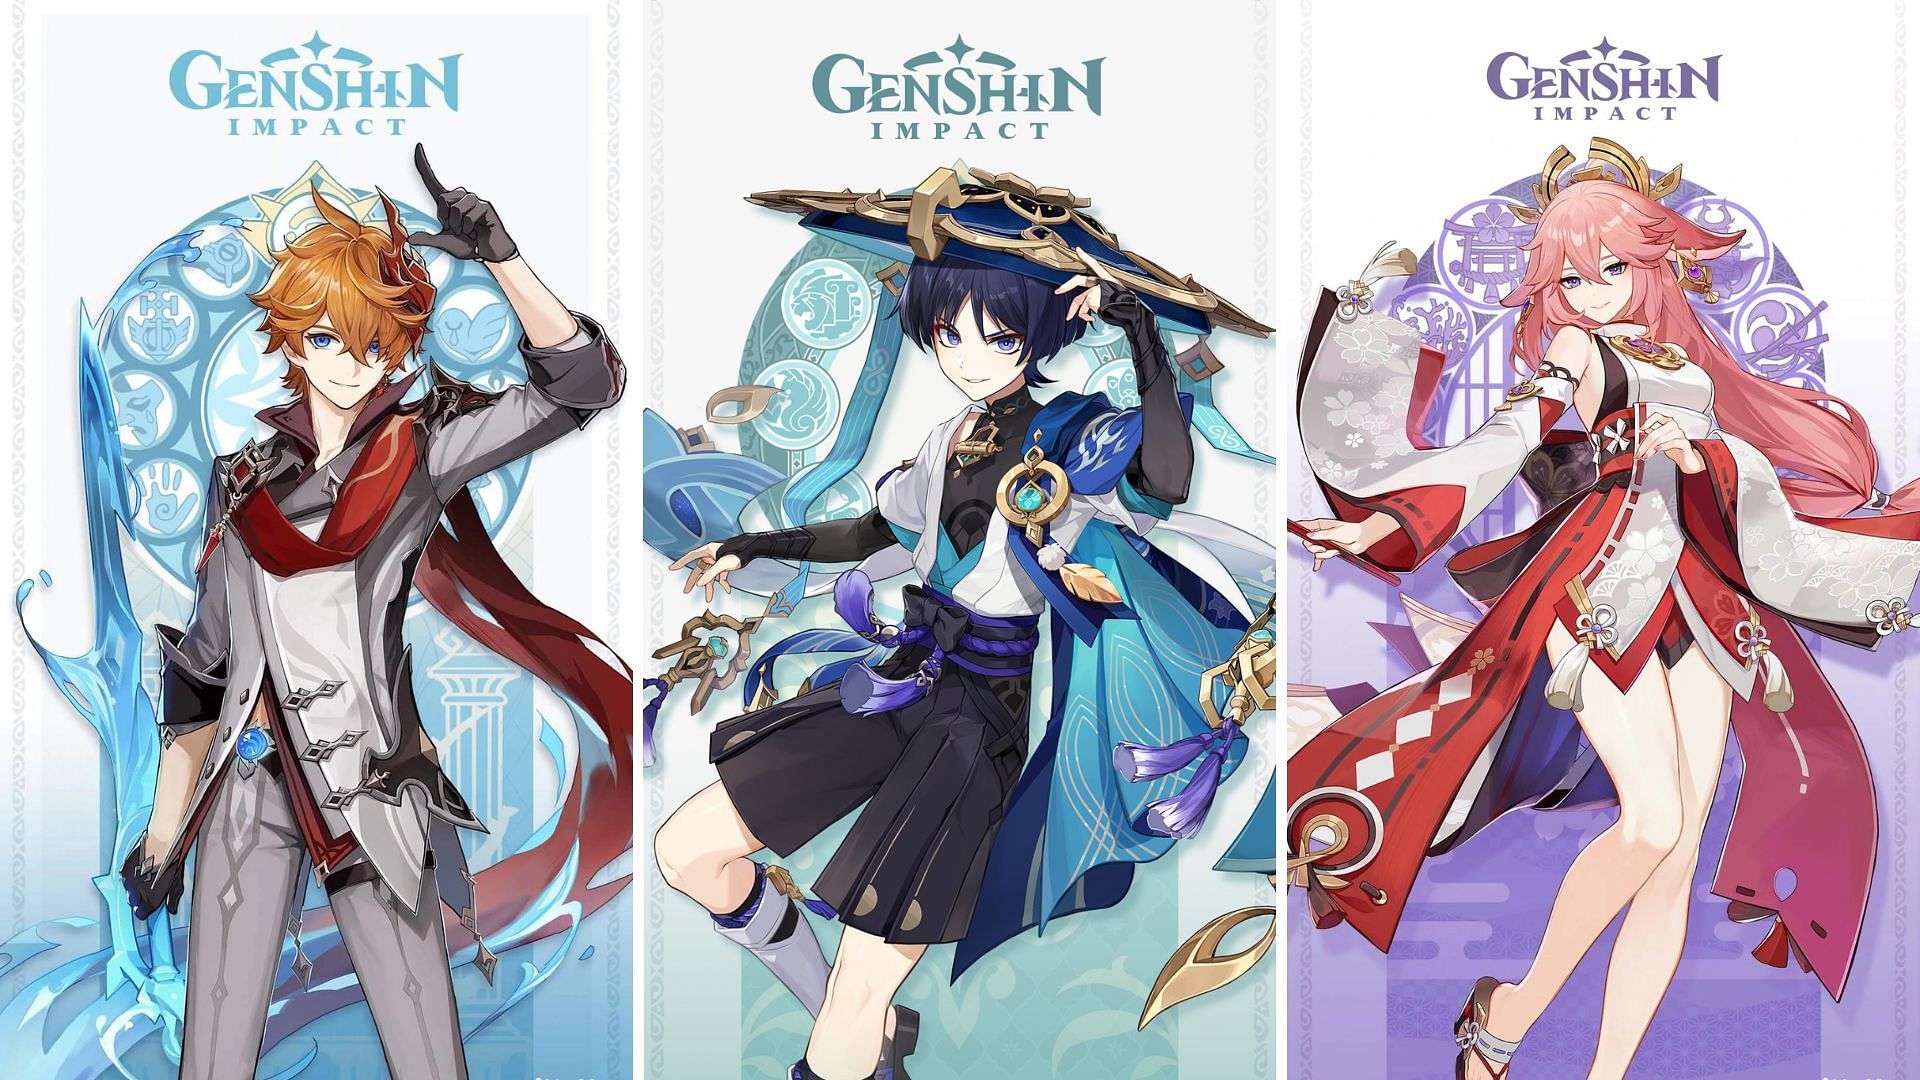 Genshin Impact banners for 2022 Childe, Yae, Wanderer, and